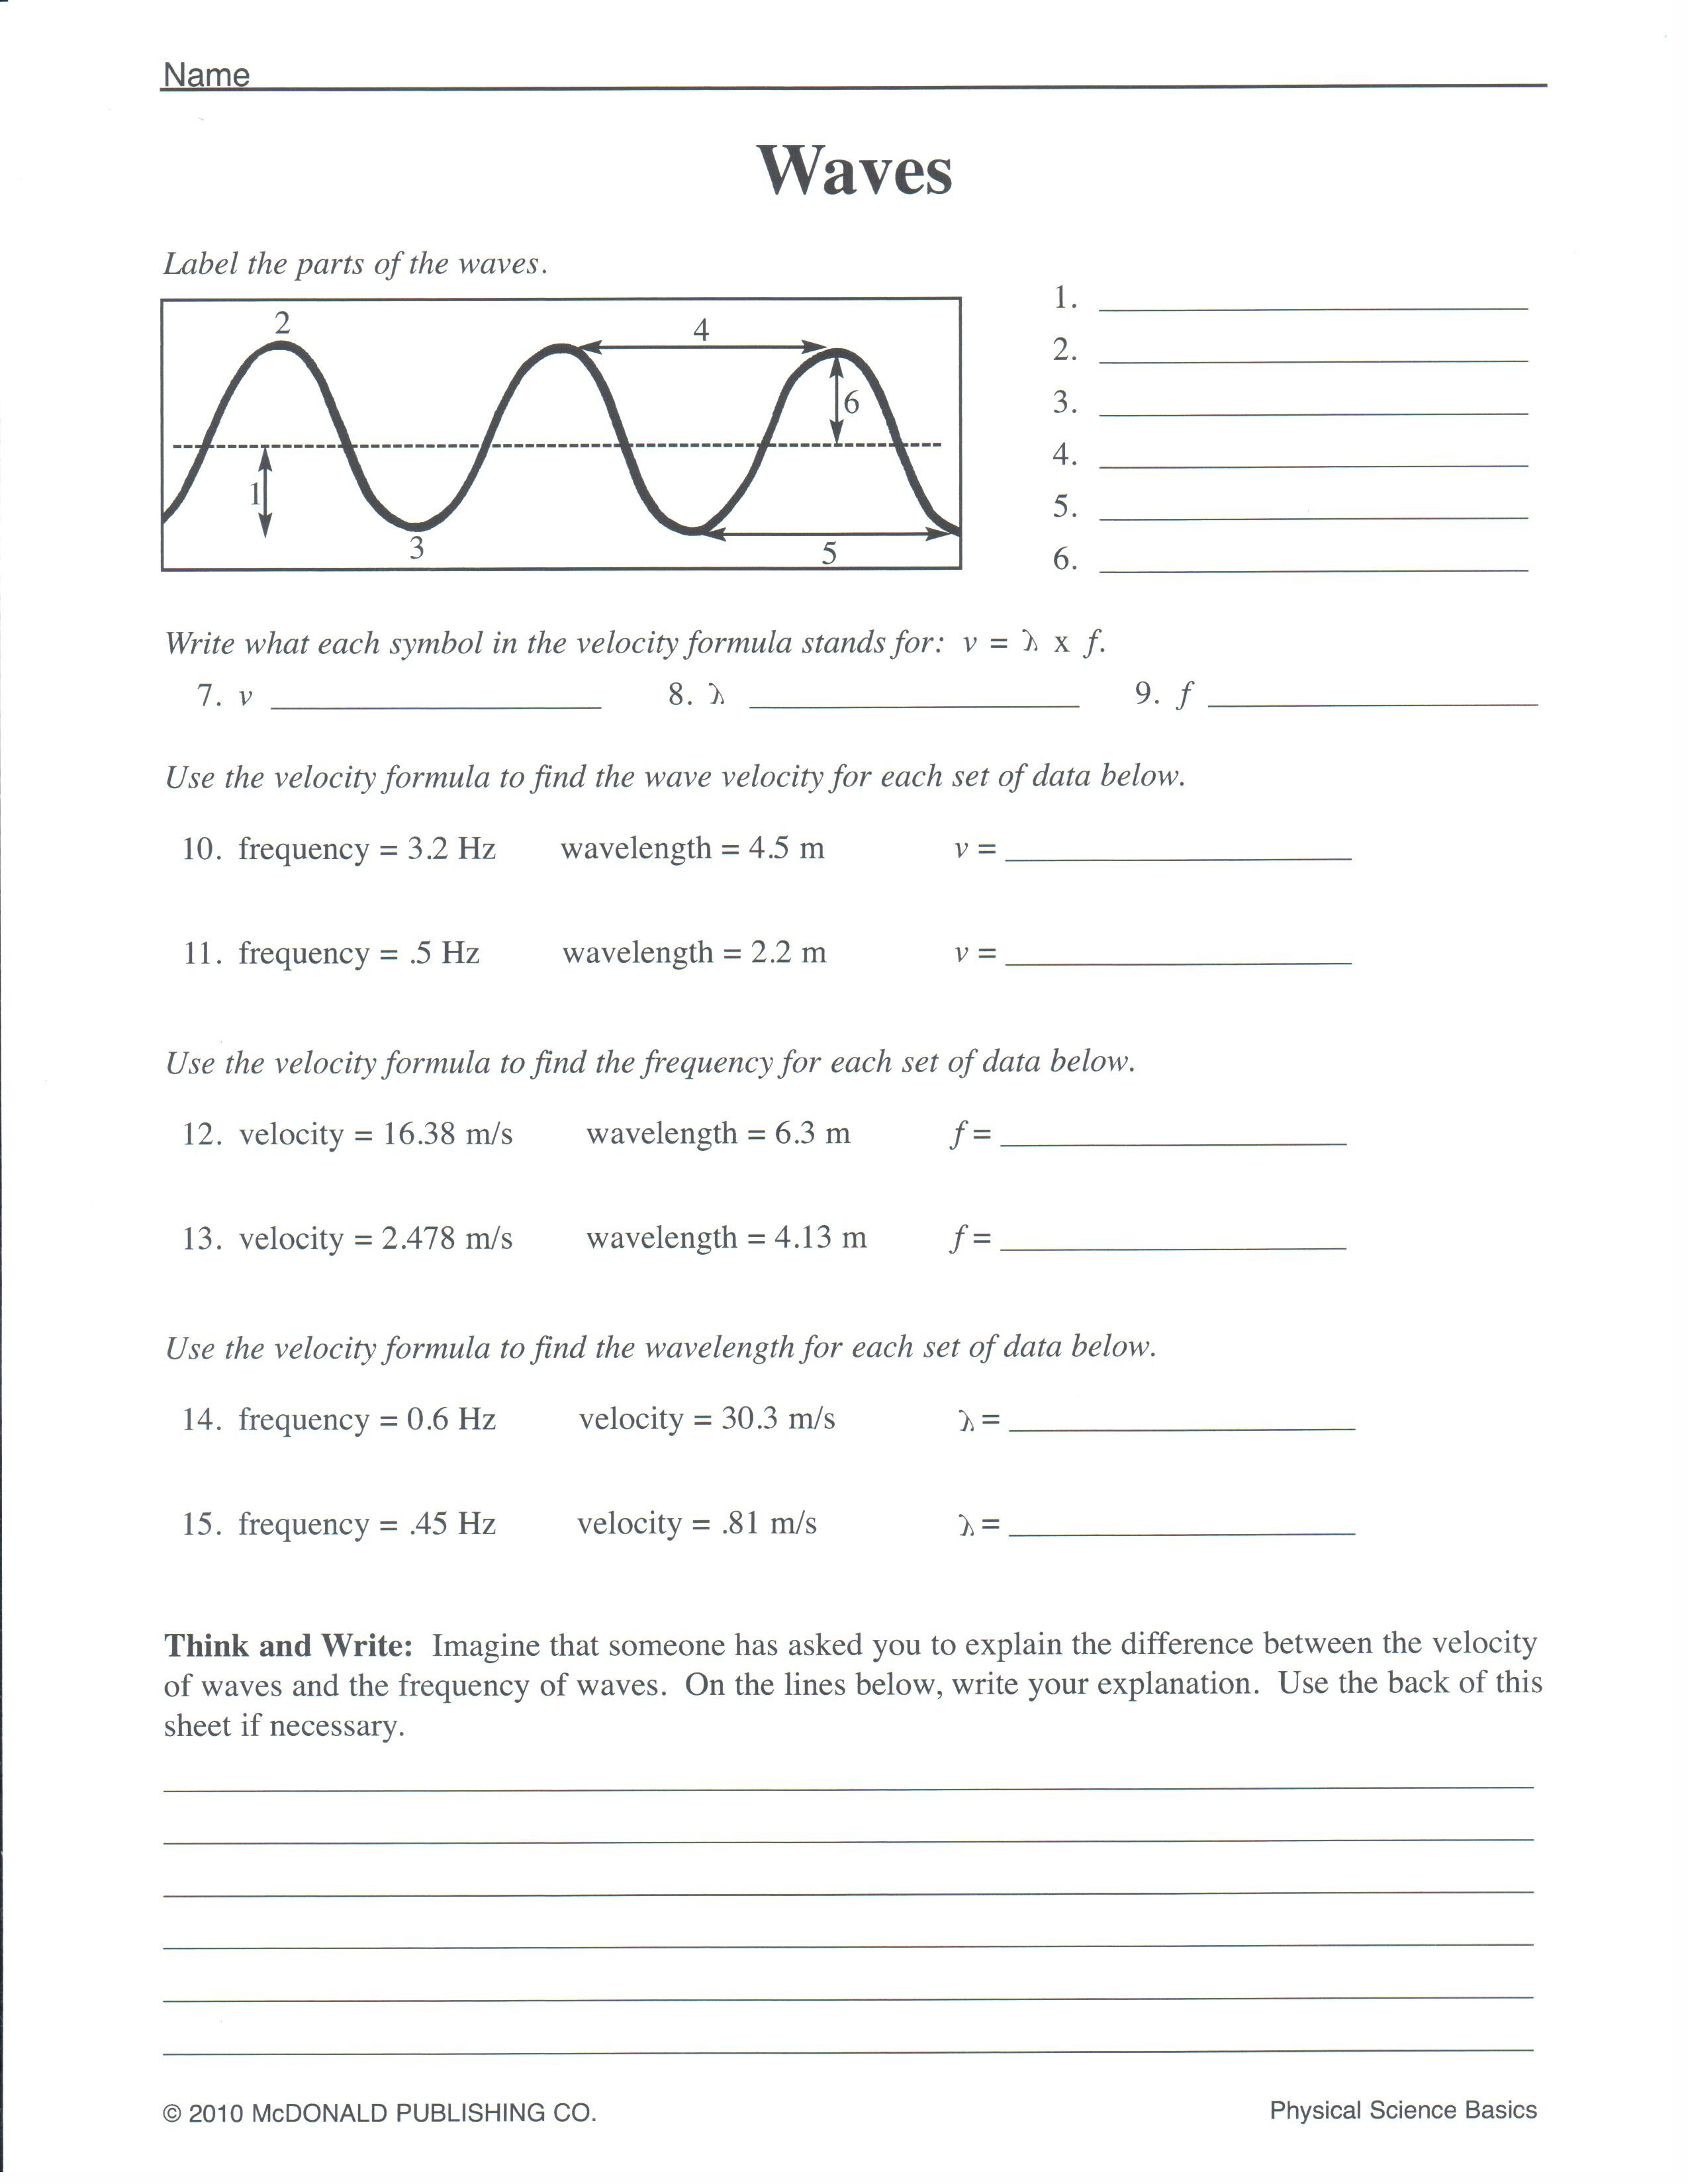 Free Science Worksheets For 2Nd Grade Science Worksheet For Grade 8 | Grade 8 Science Worksheets Printable